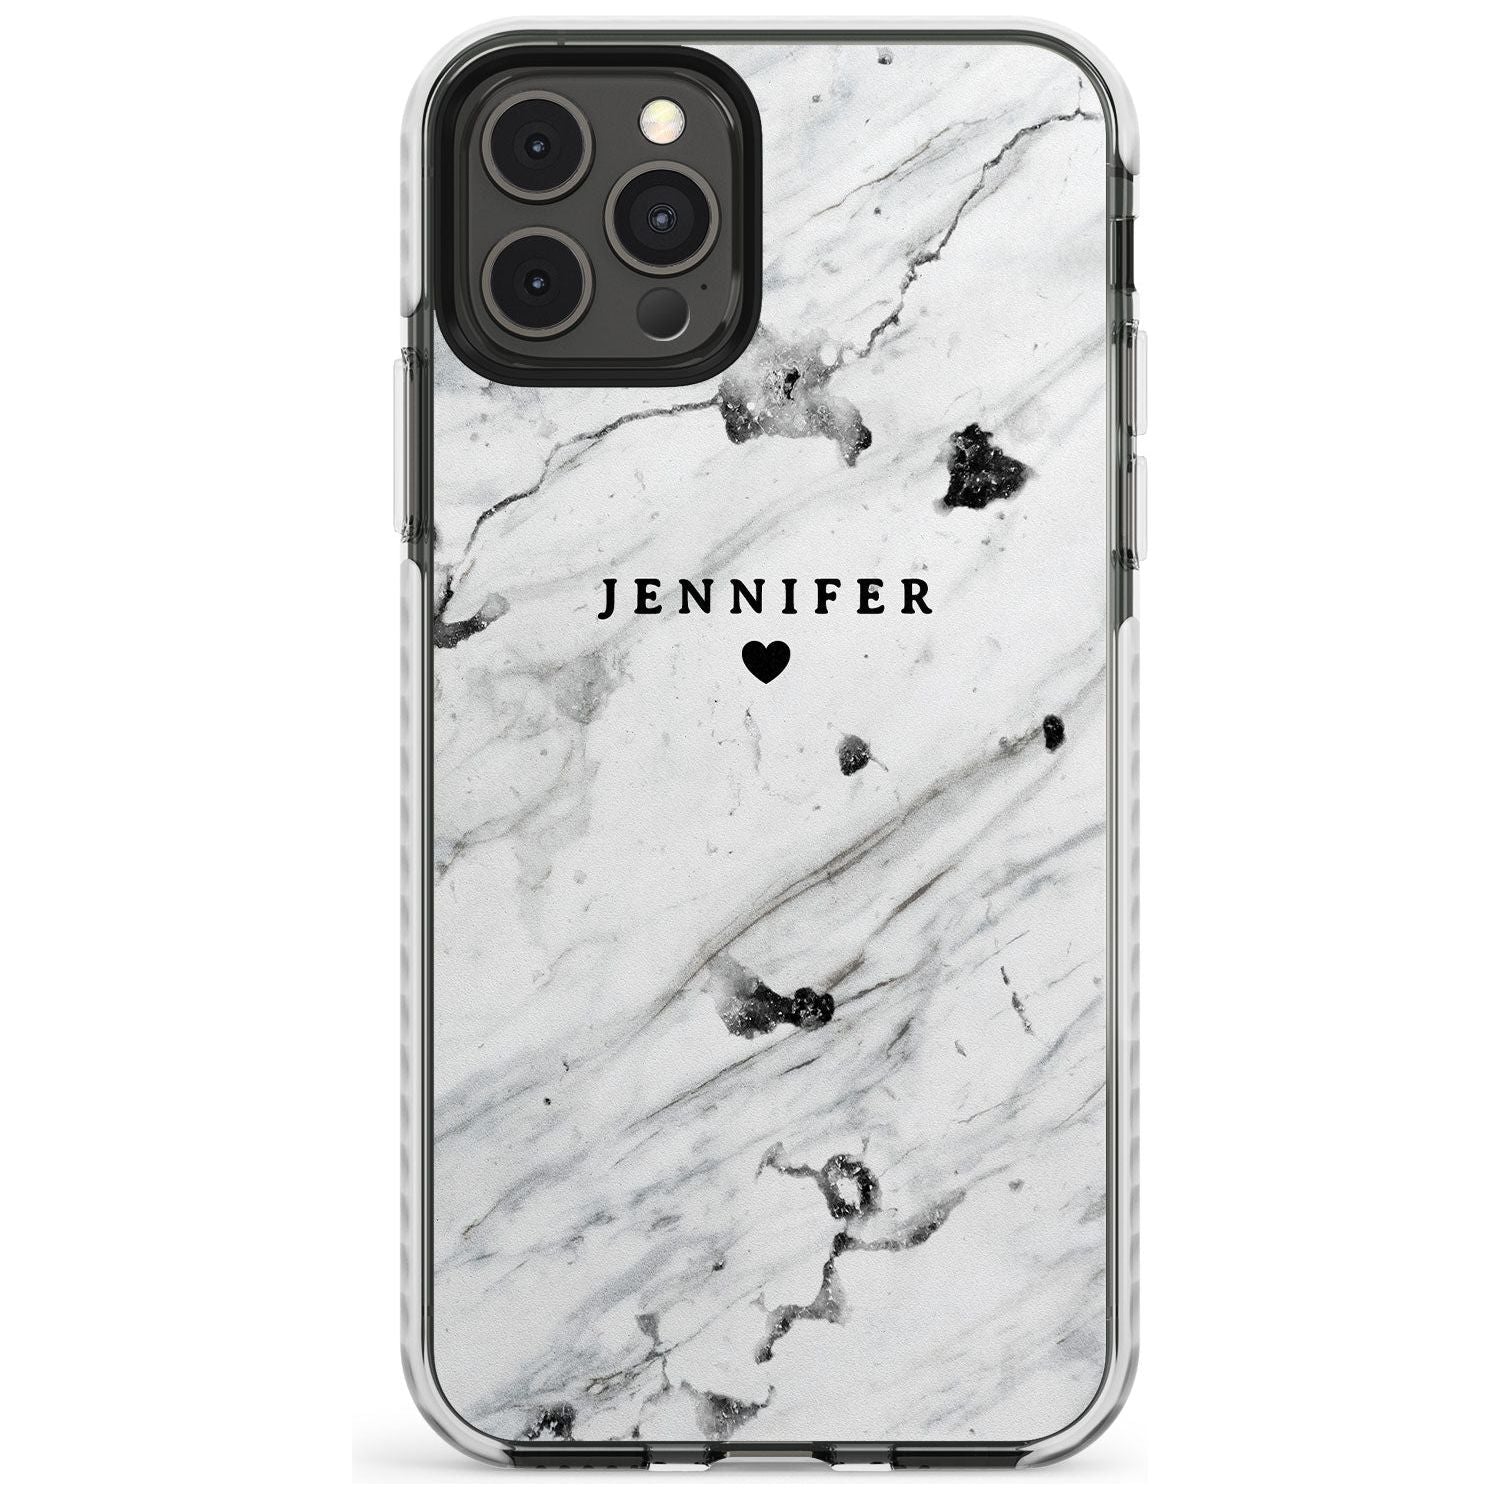 Personalised Black & White Marble Slim TPU Phone Case for iPhone 11 Pro Max